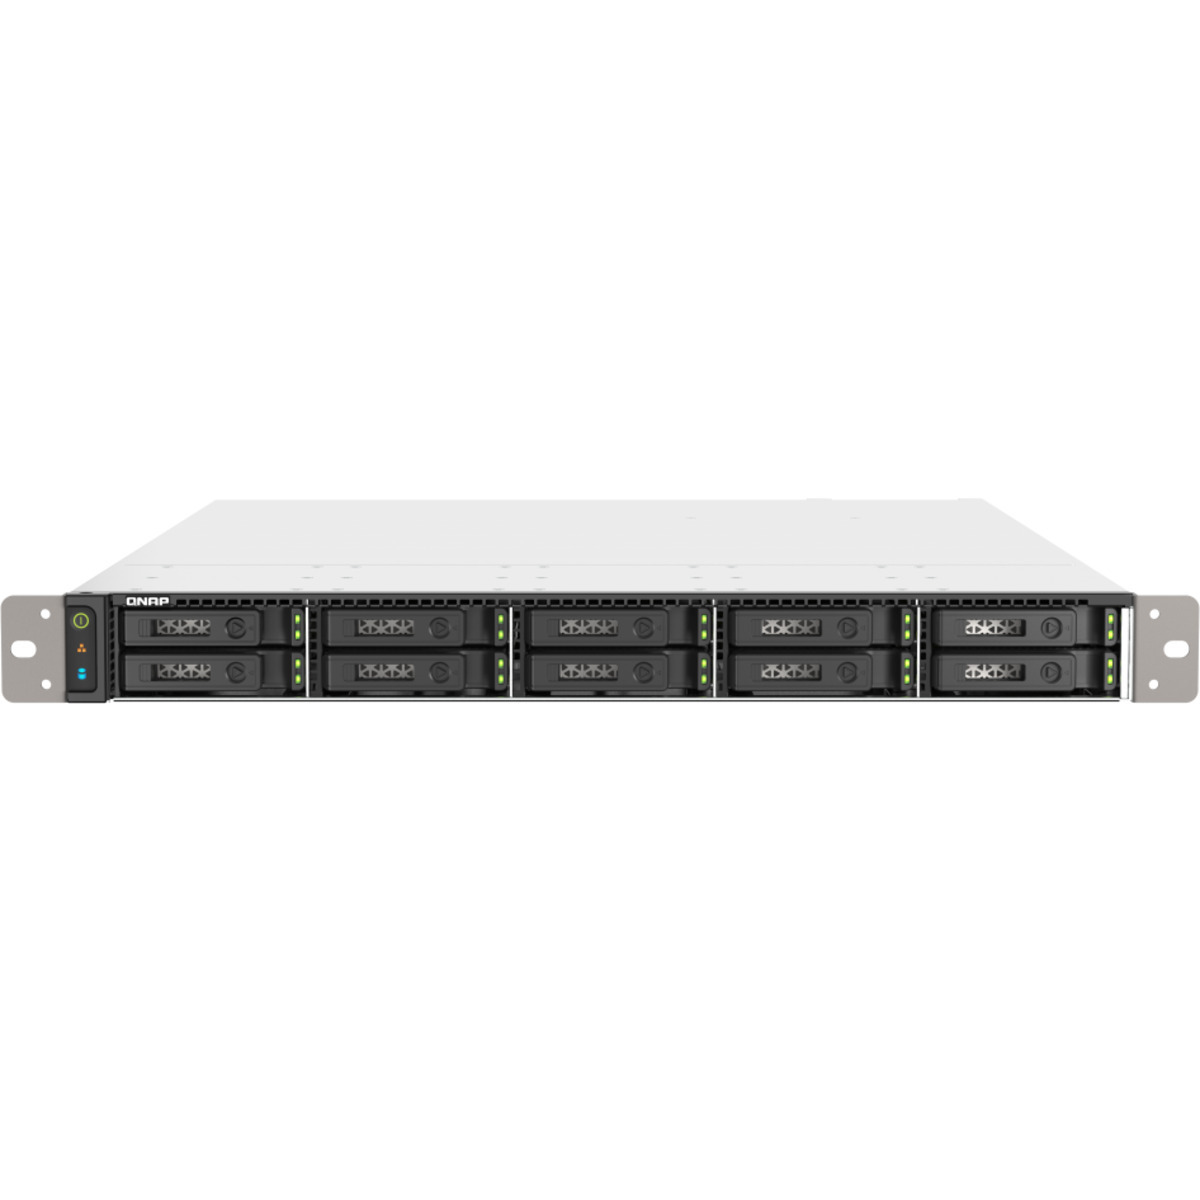 QNAP TS-h1090FU-7232P 9tb 10-Bay RackMount Large Business / Enterprise NAS - Network Attached Storage Device 9x1tb Sabrent Rocket 5 SB-RKT5-1TB  13000/9500MB/s M.2 2280 NVMe SSD CONSUMER Class Drives Installed - Burn-In Tested TS-h1090FU-7232P